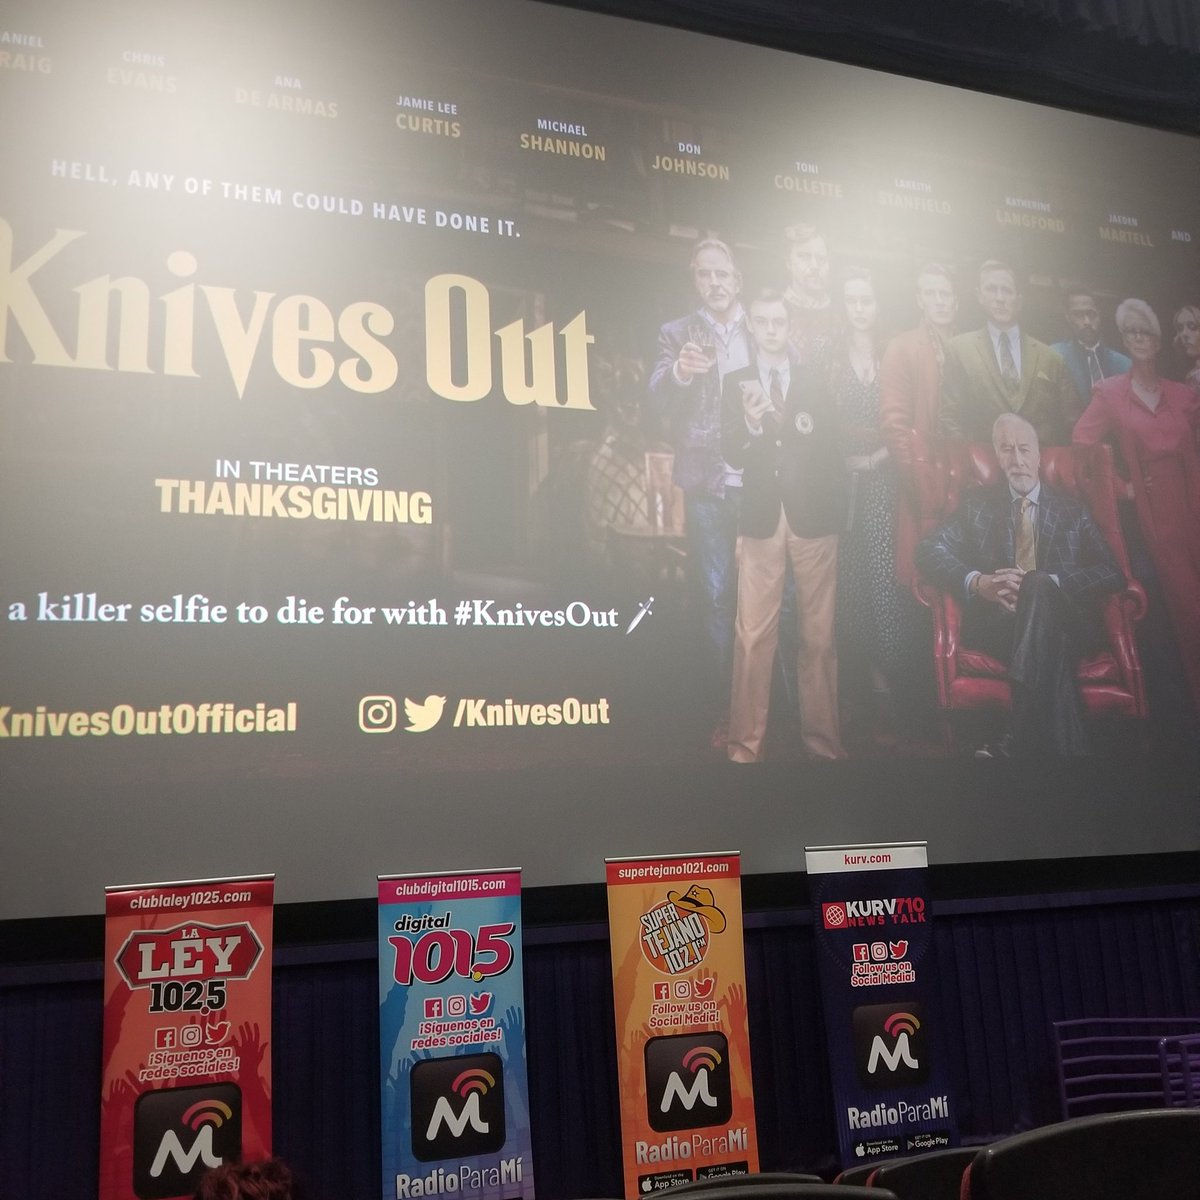 #KnivesOut #mcallen #lionsgatefilms excited to see this murder mystery